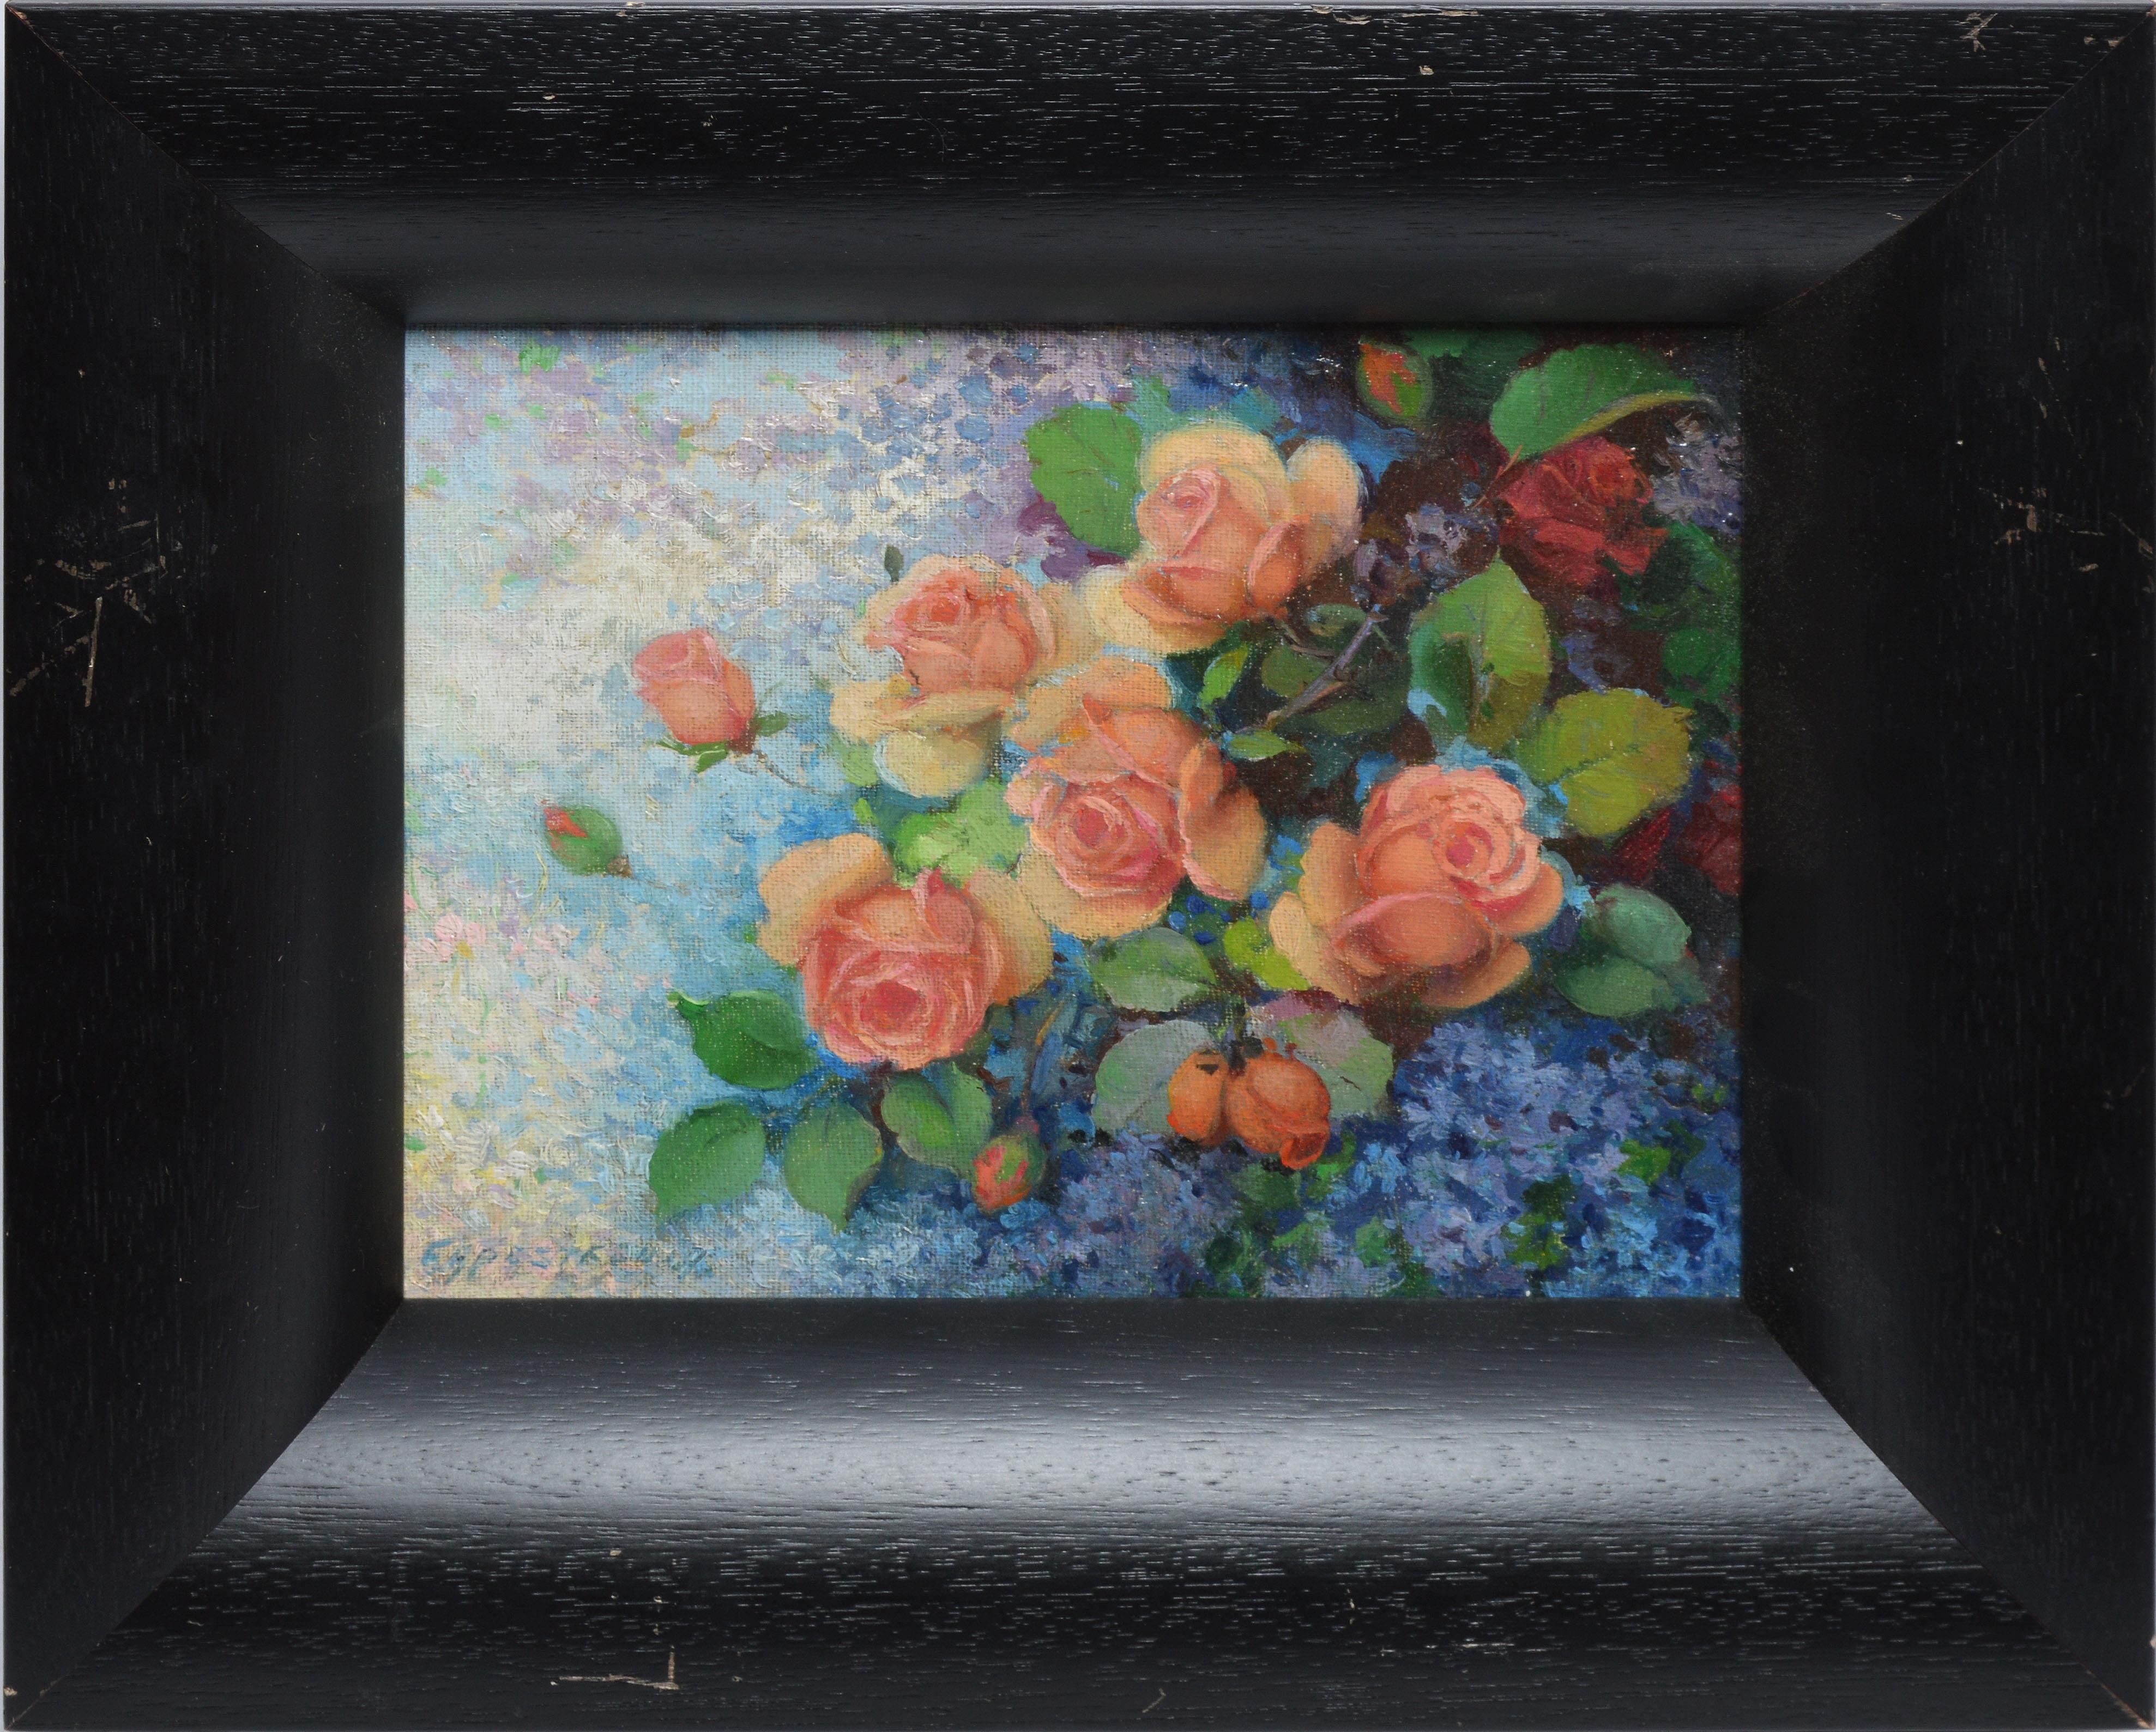 Antique Peruvian impressionist oil painting of flowers by Efren Pelayo Apesteguia  (born 1900).  Oil on canvas, circa 1930.  Signed lower left.  Displayed in an impressionist frame.  Image size, 9.5"L x 8"H, overall 14"L x 12"H.